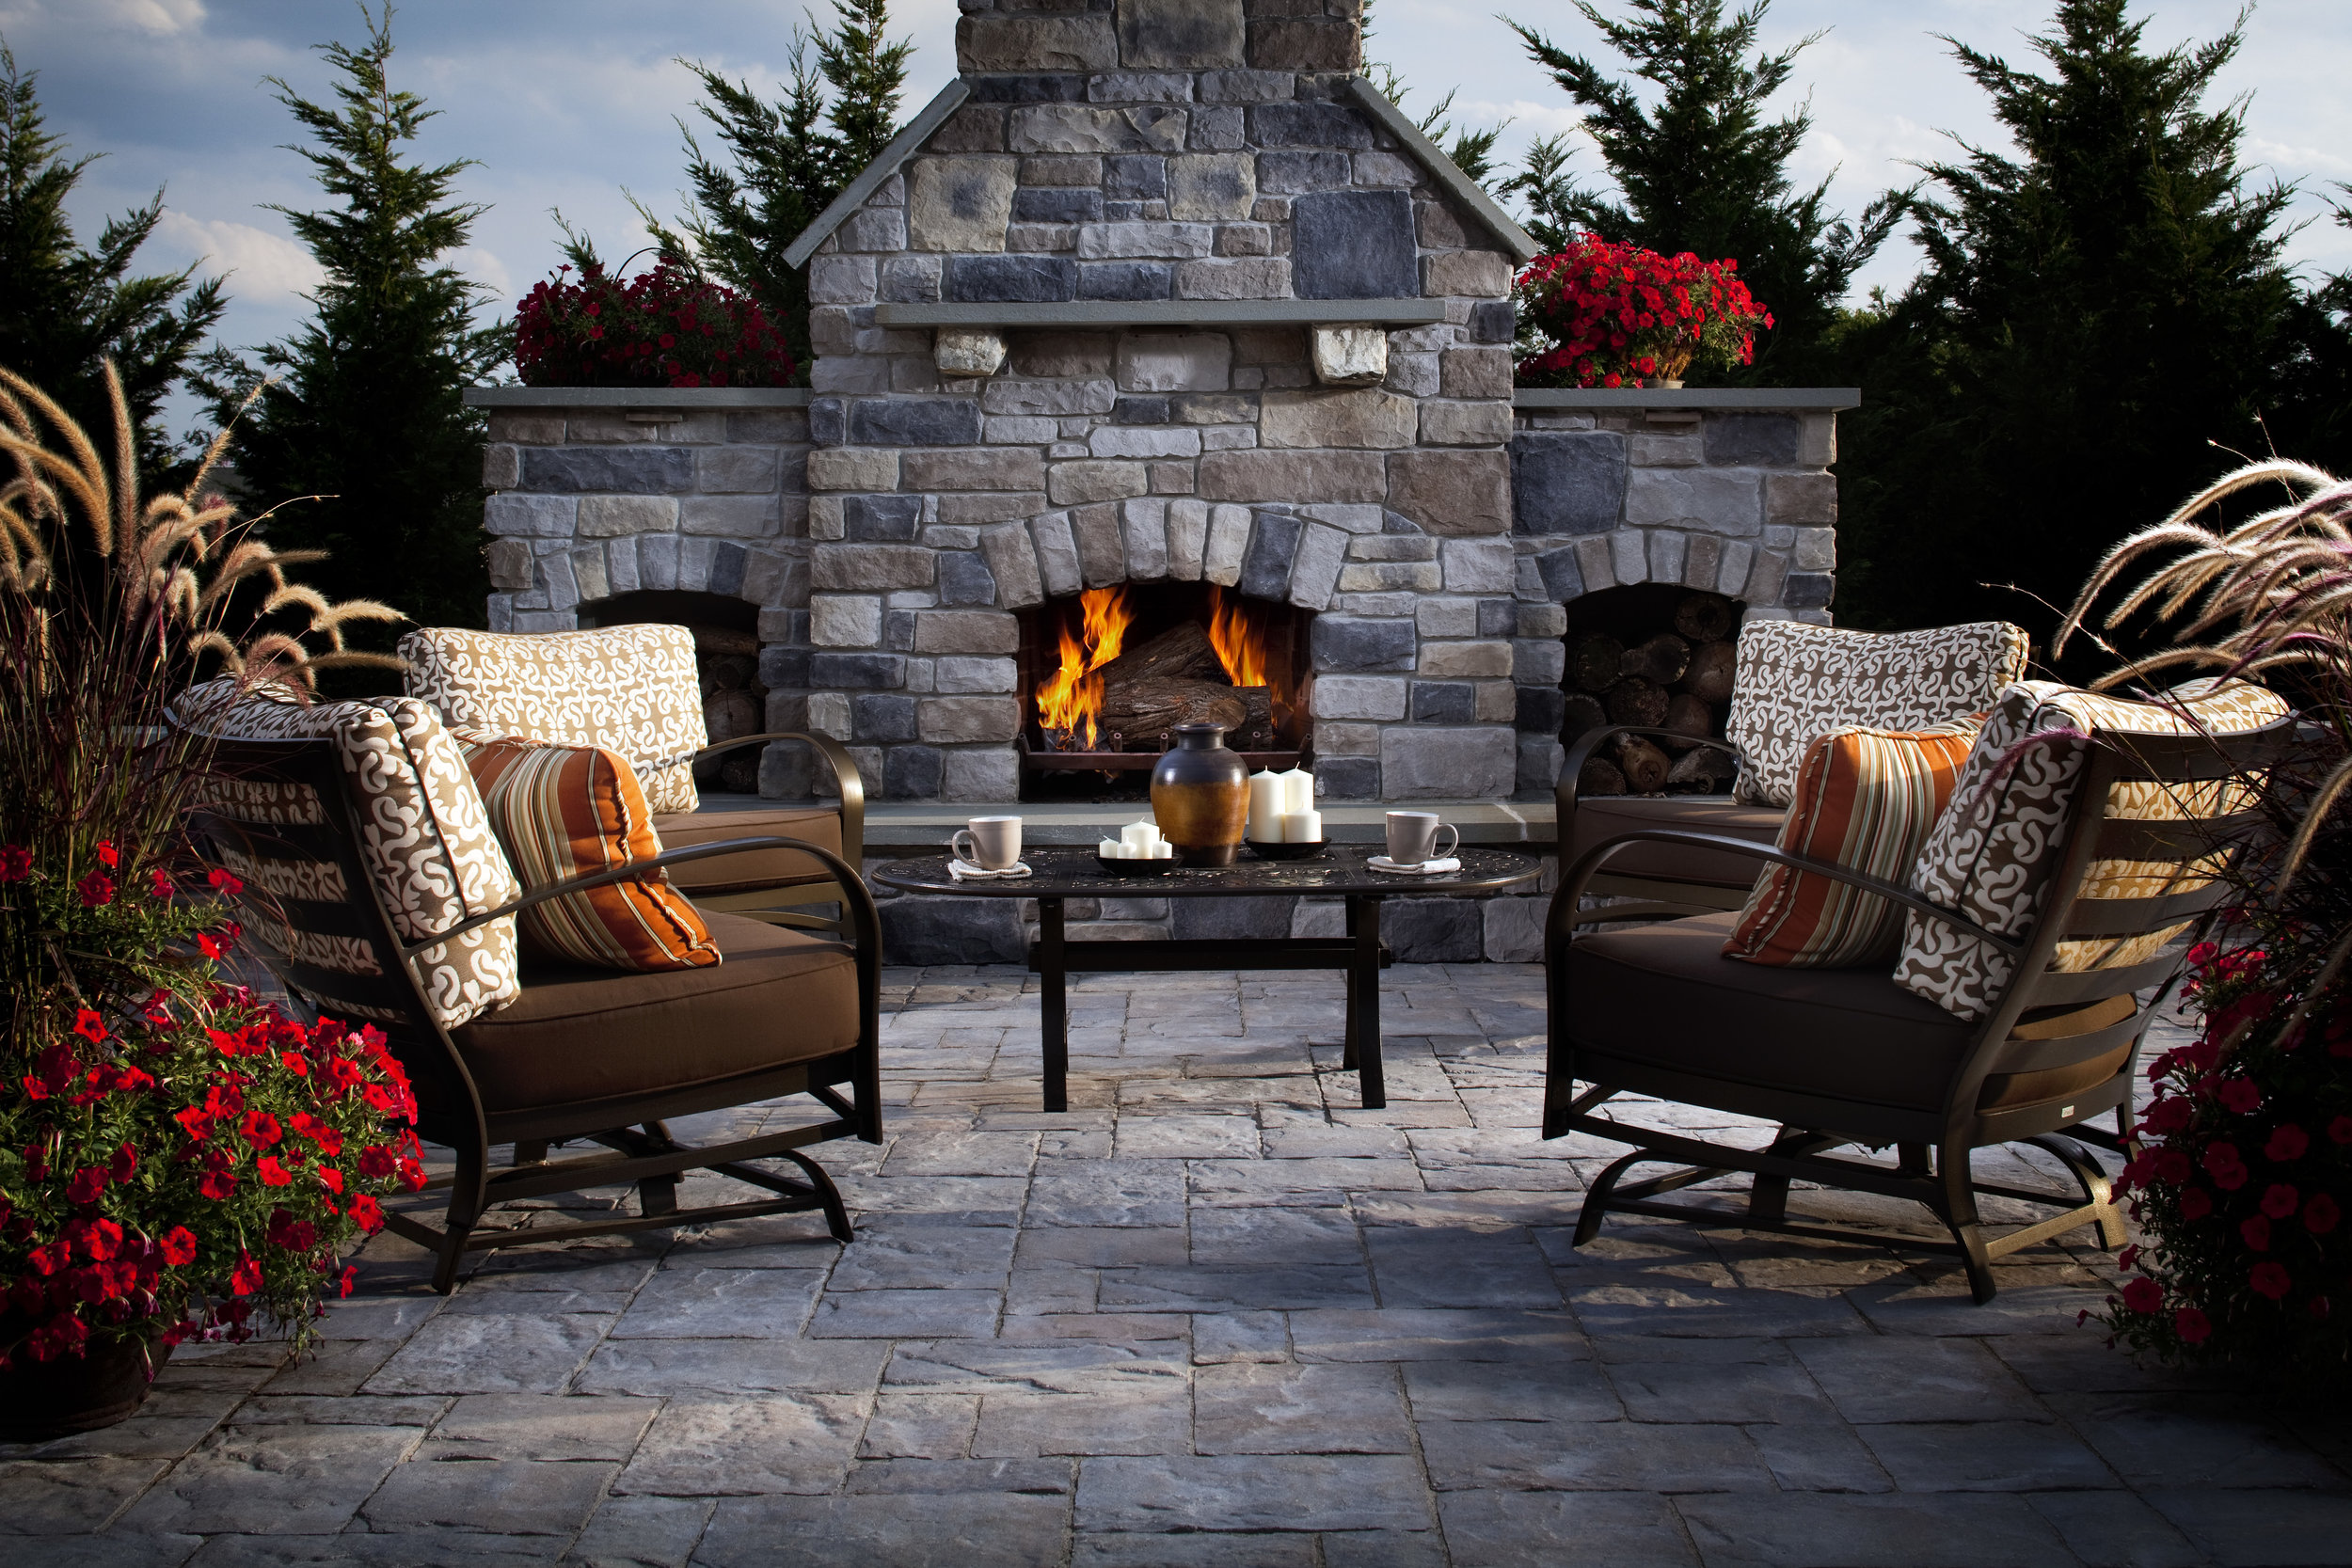 outdoor fireplace patio paver plantings outdoor room paradise relax wood burning natural gas